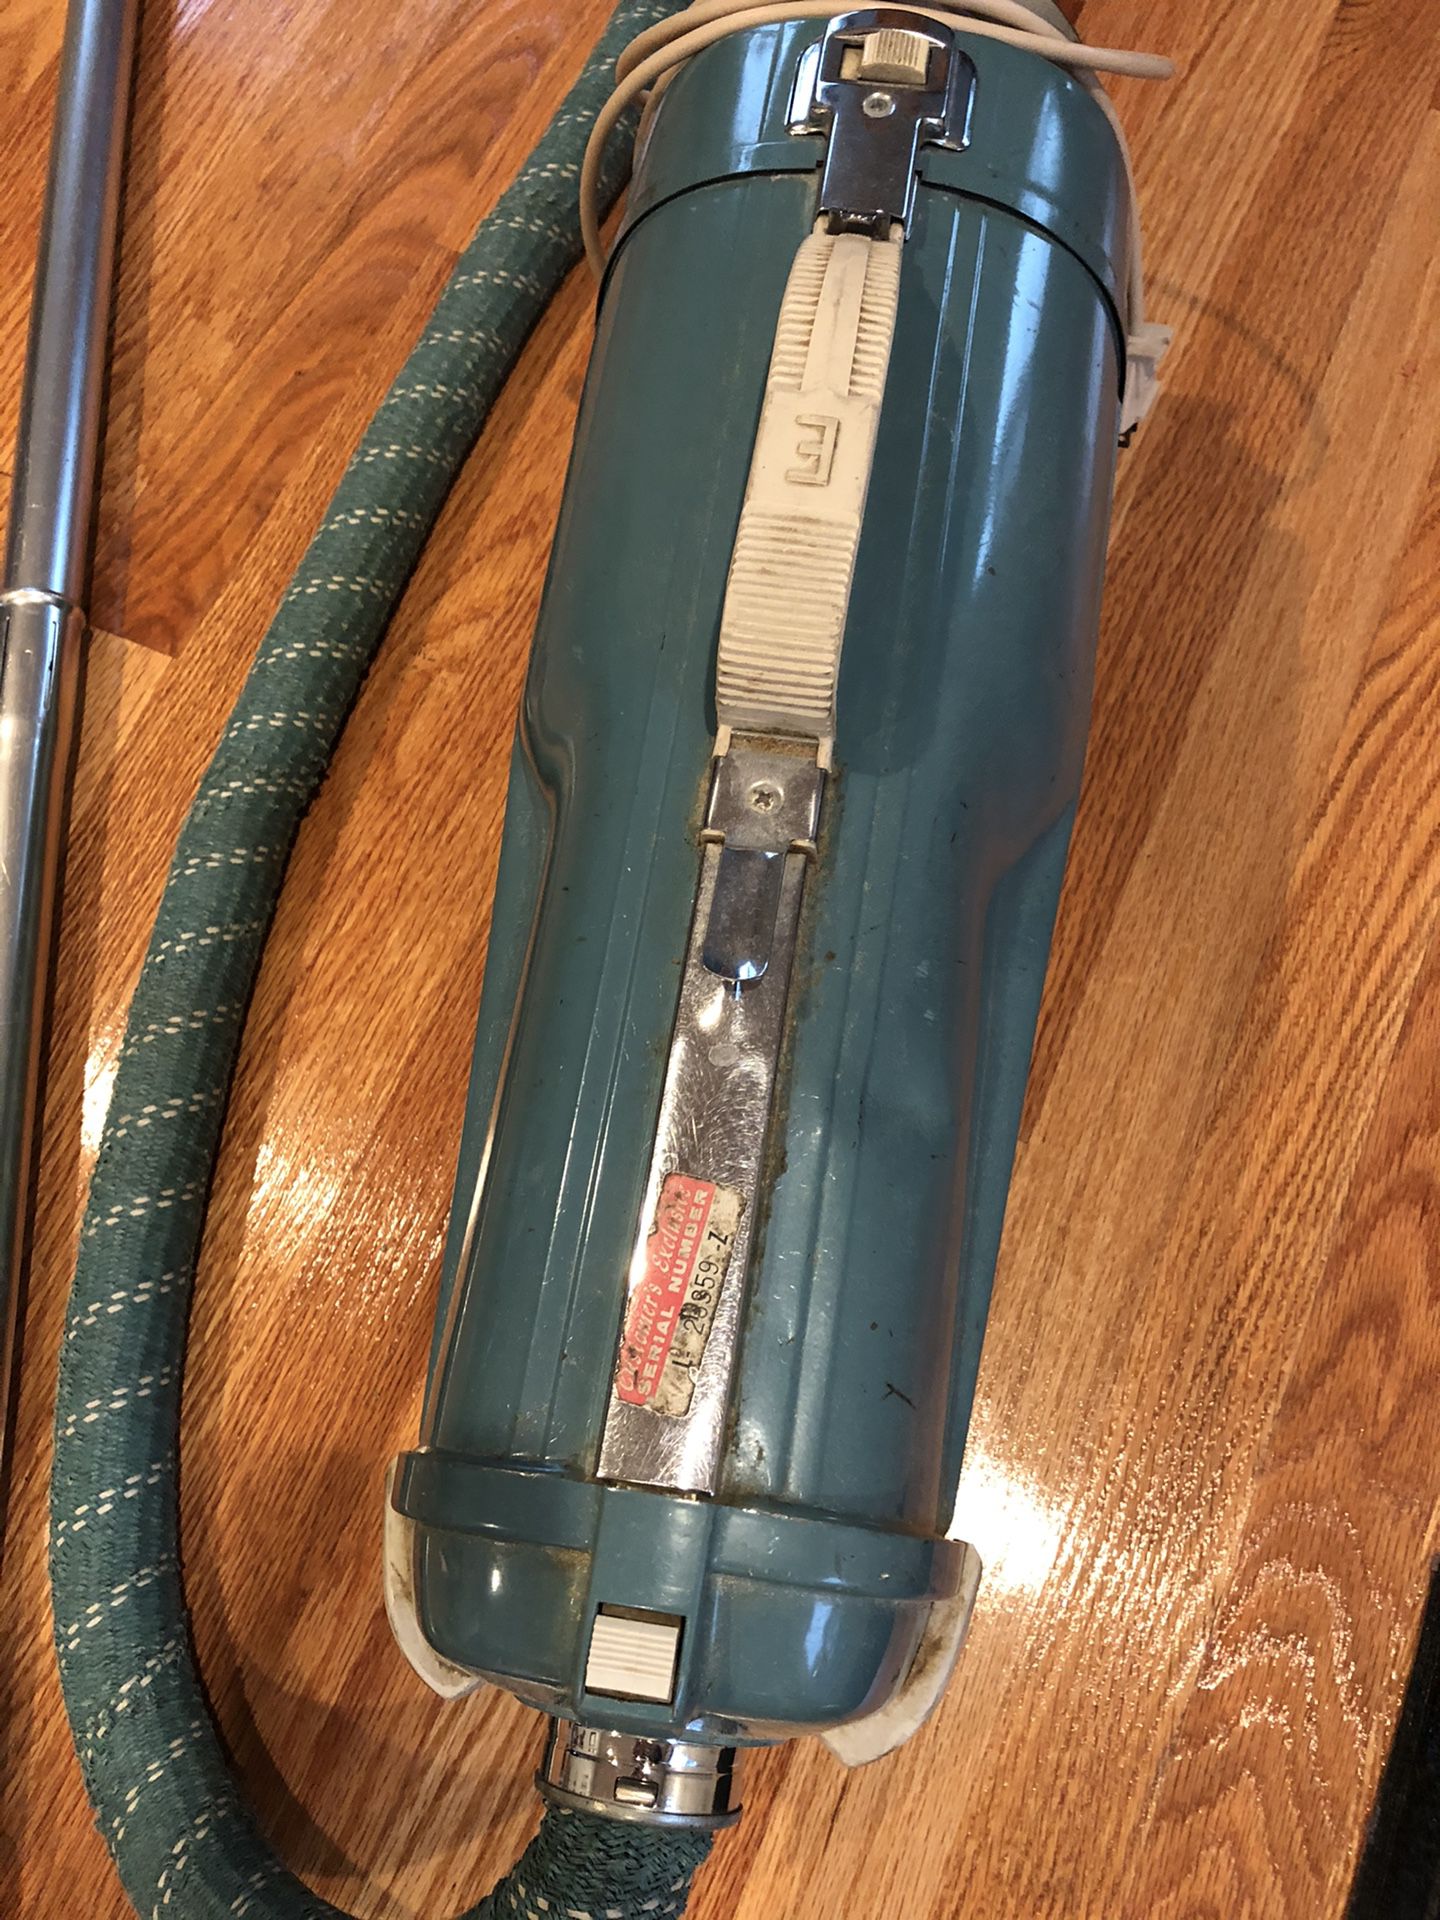 Electrolux canister vacuum